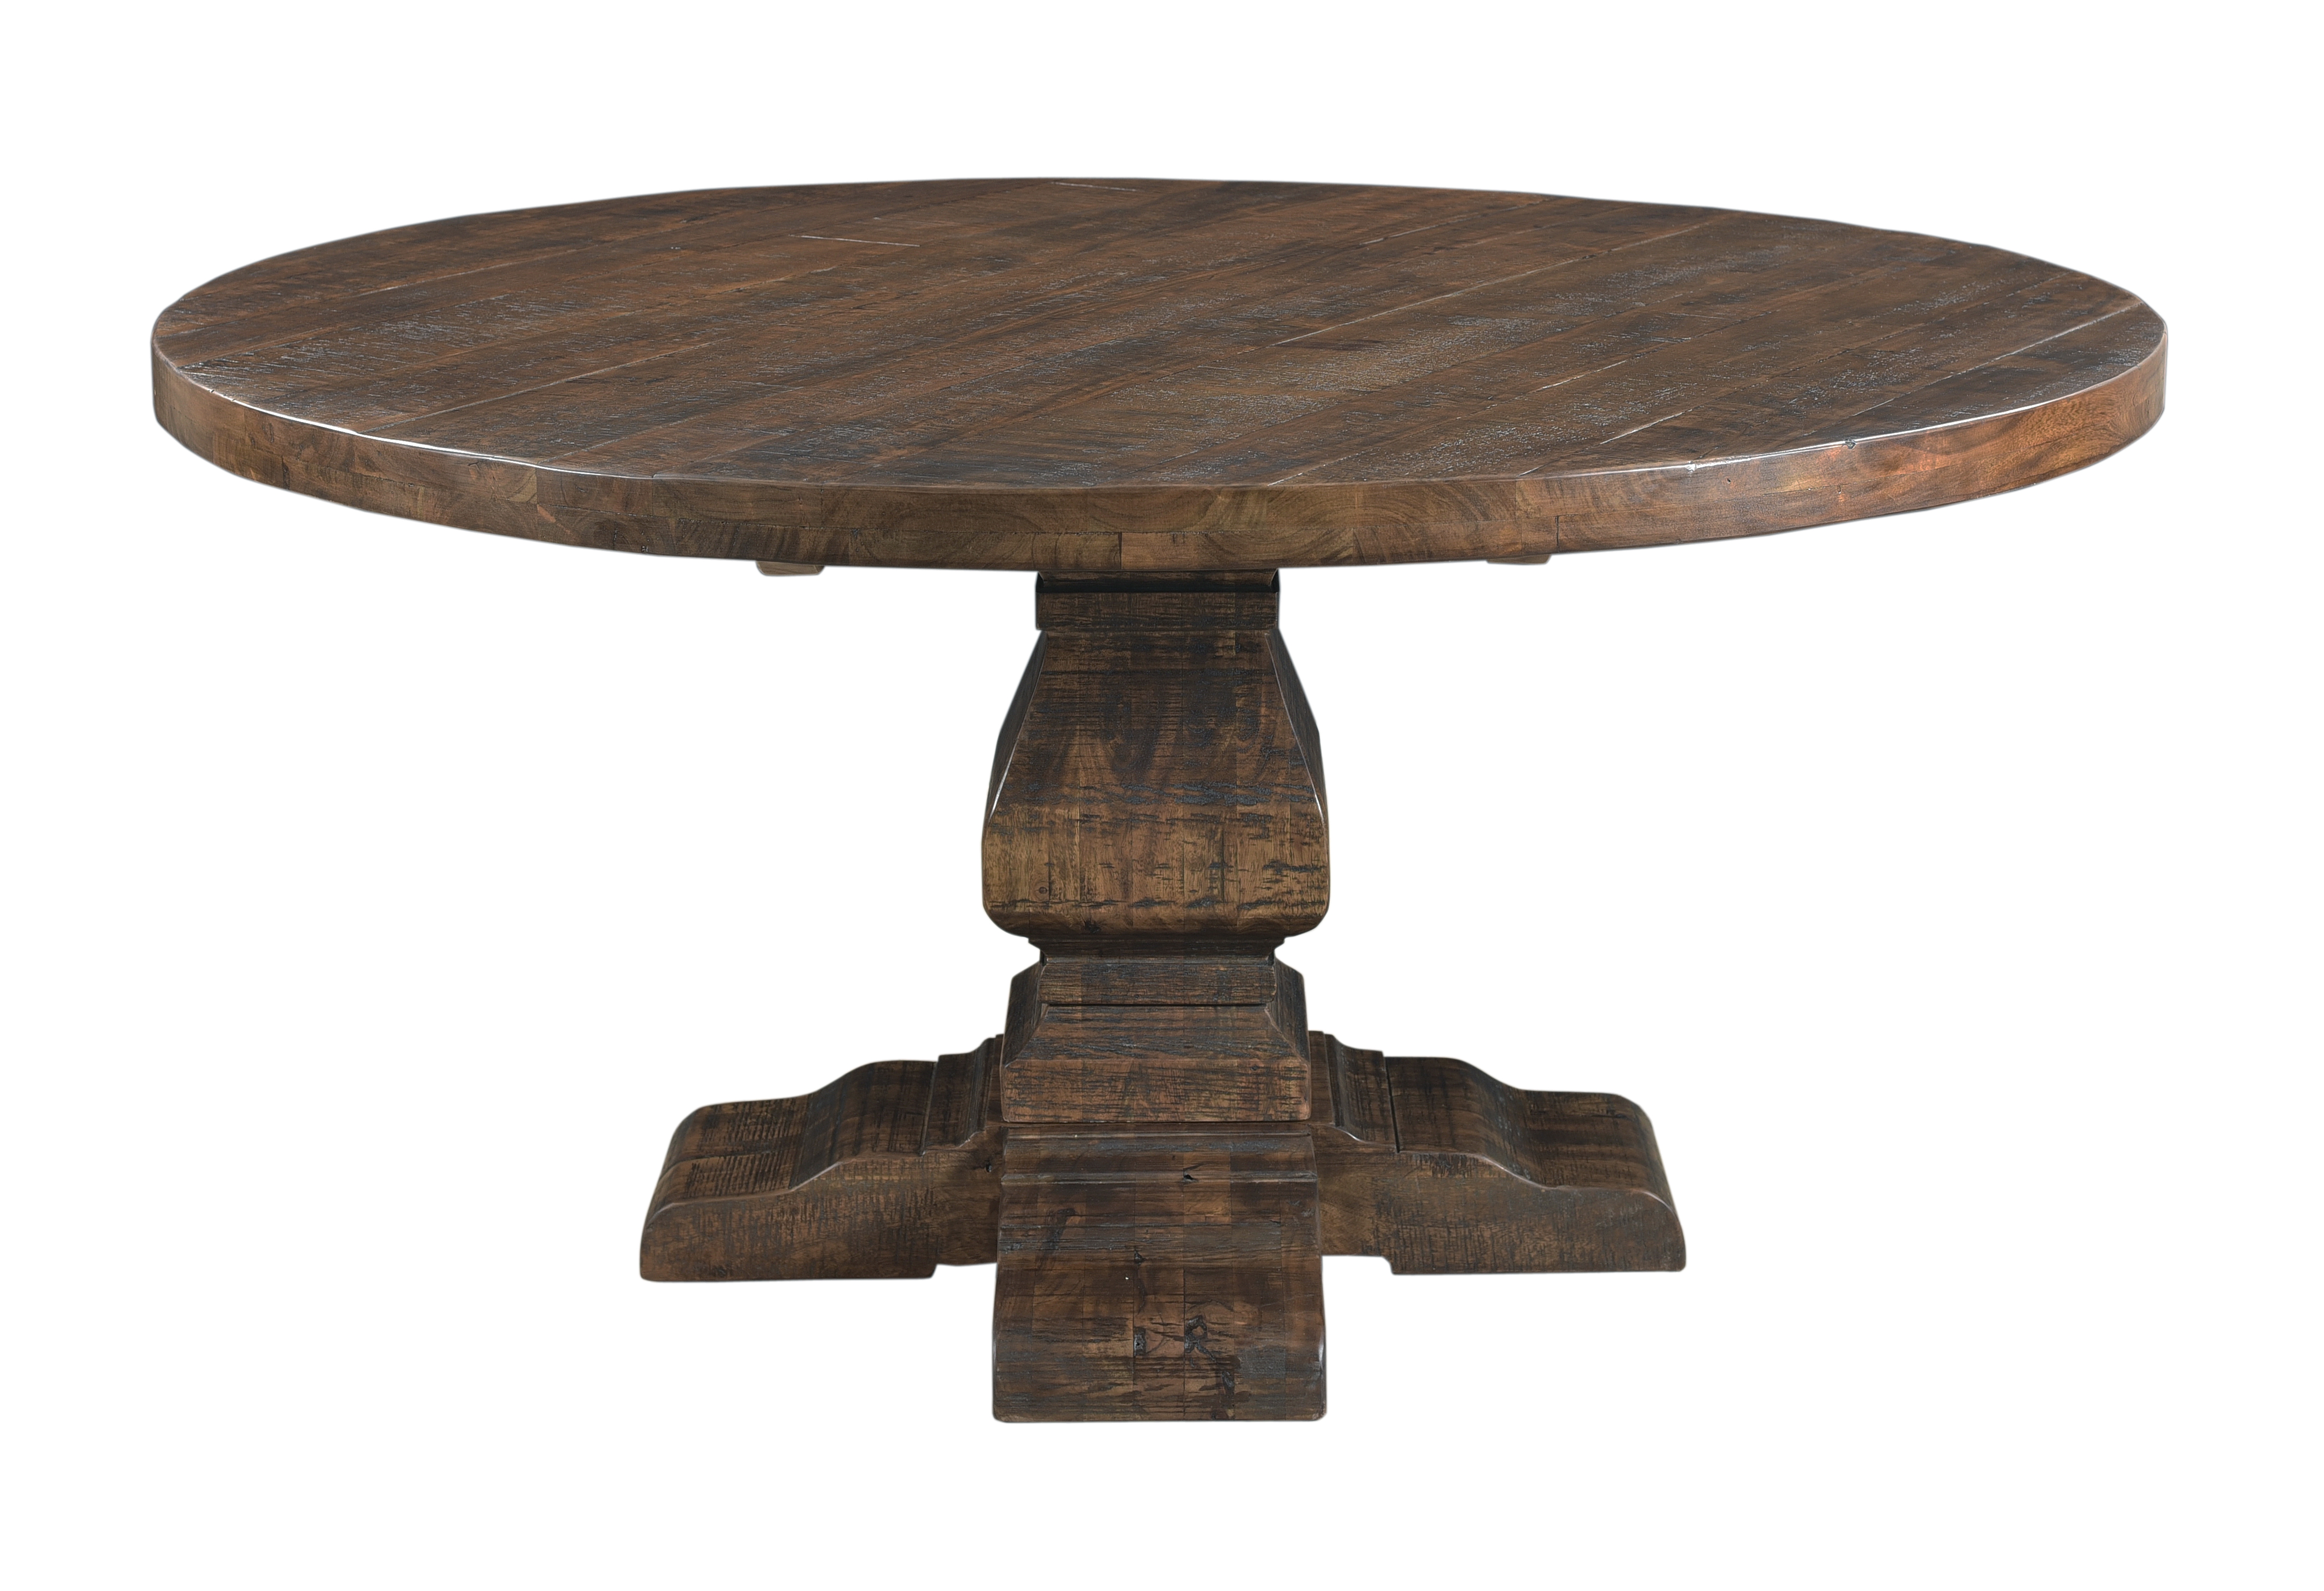 Iver Round Dining Table, Distressed Brown - Image 1